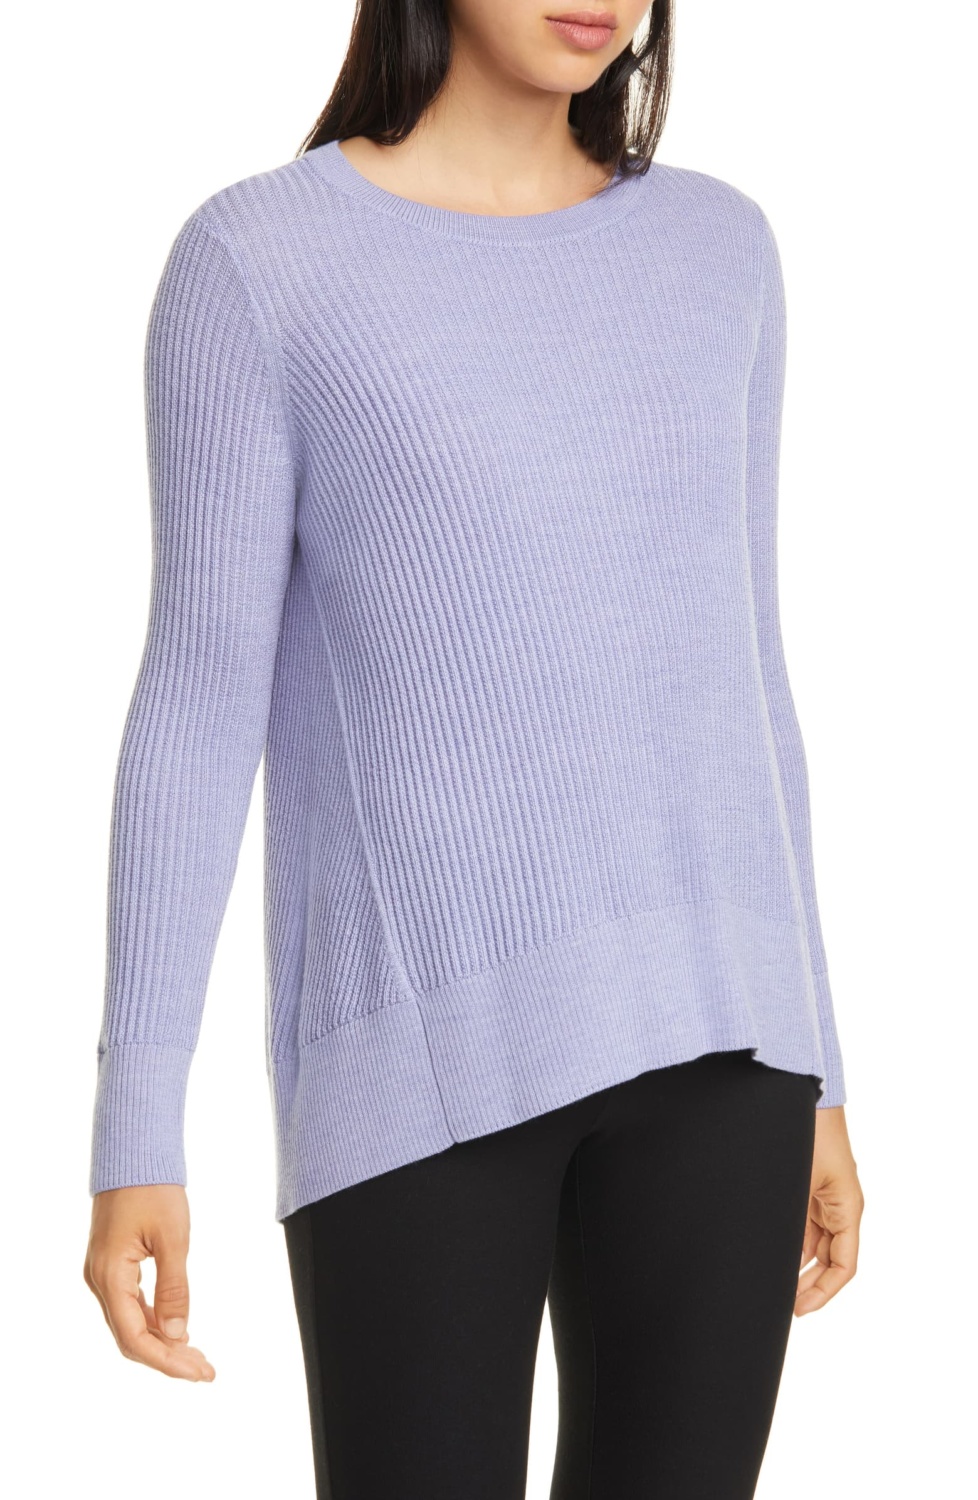 Best of Black Friday sales: Eileen Fisher ribbed merino sweater, 50% off. Details at une femme d'un certain age.